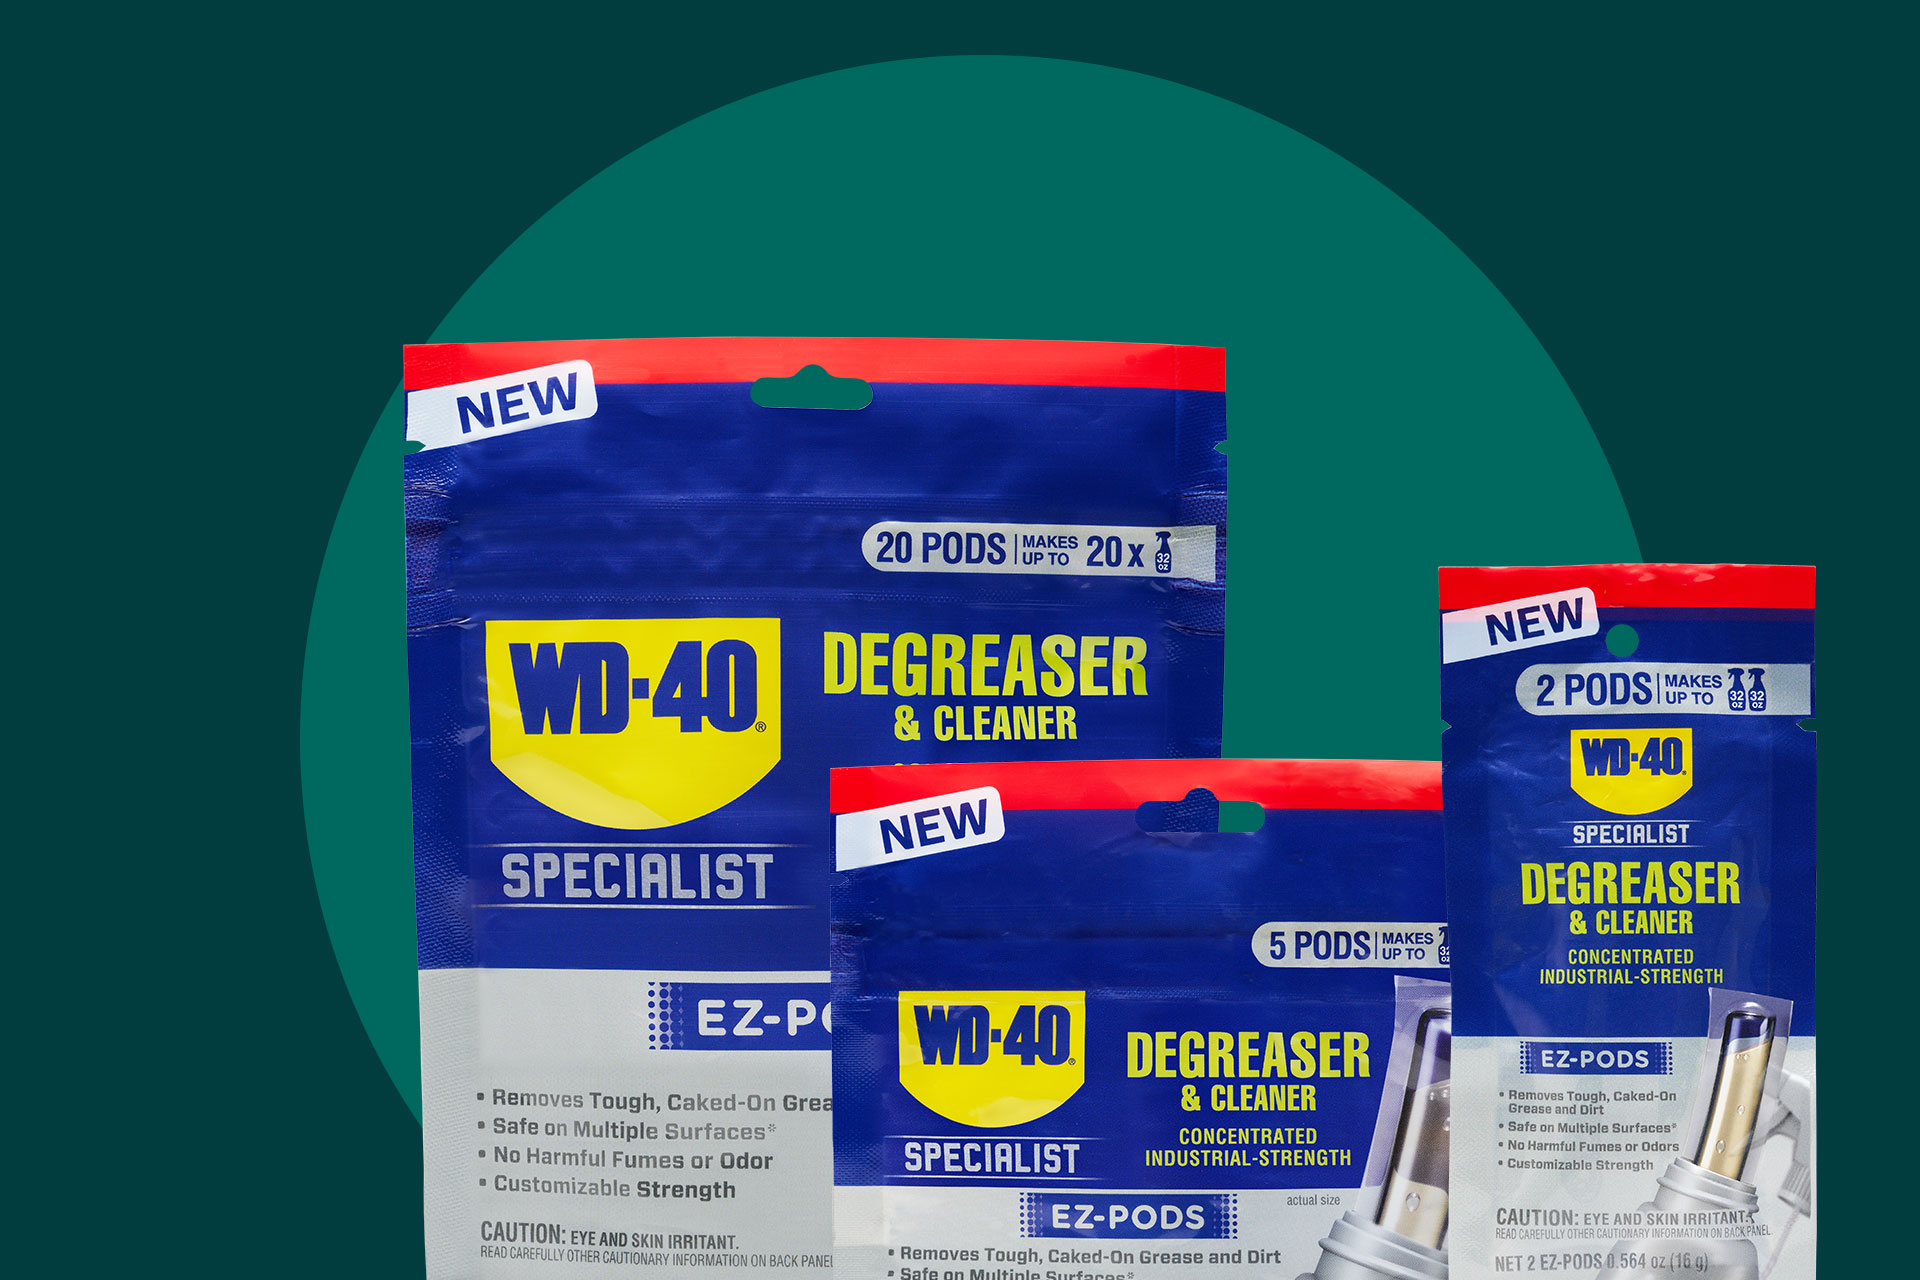 Family of WD-40 products in recyclable flexible packaging